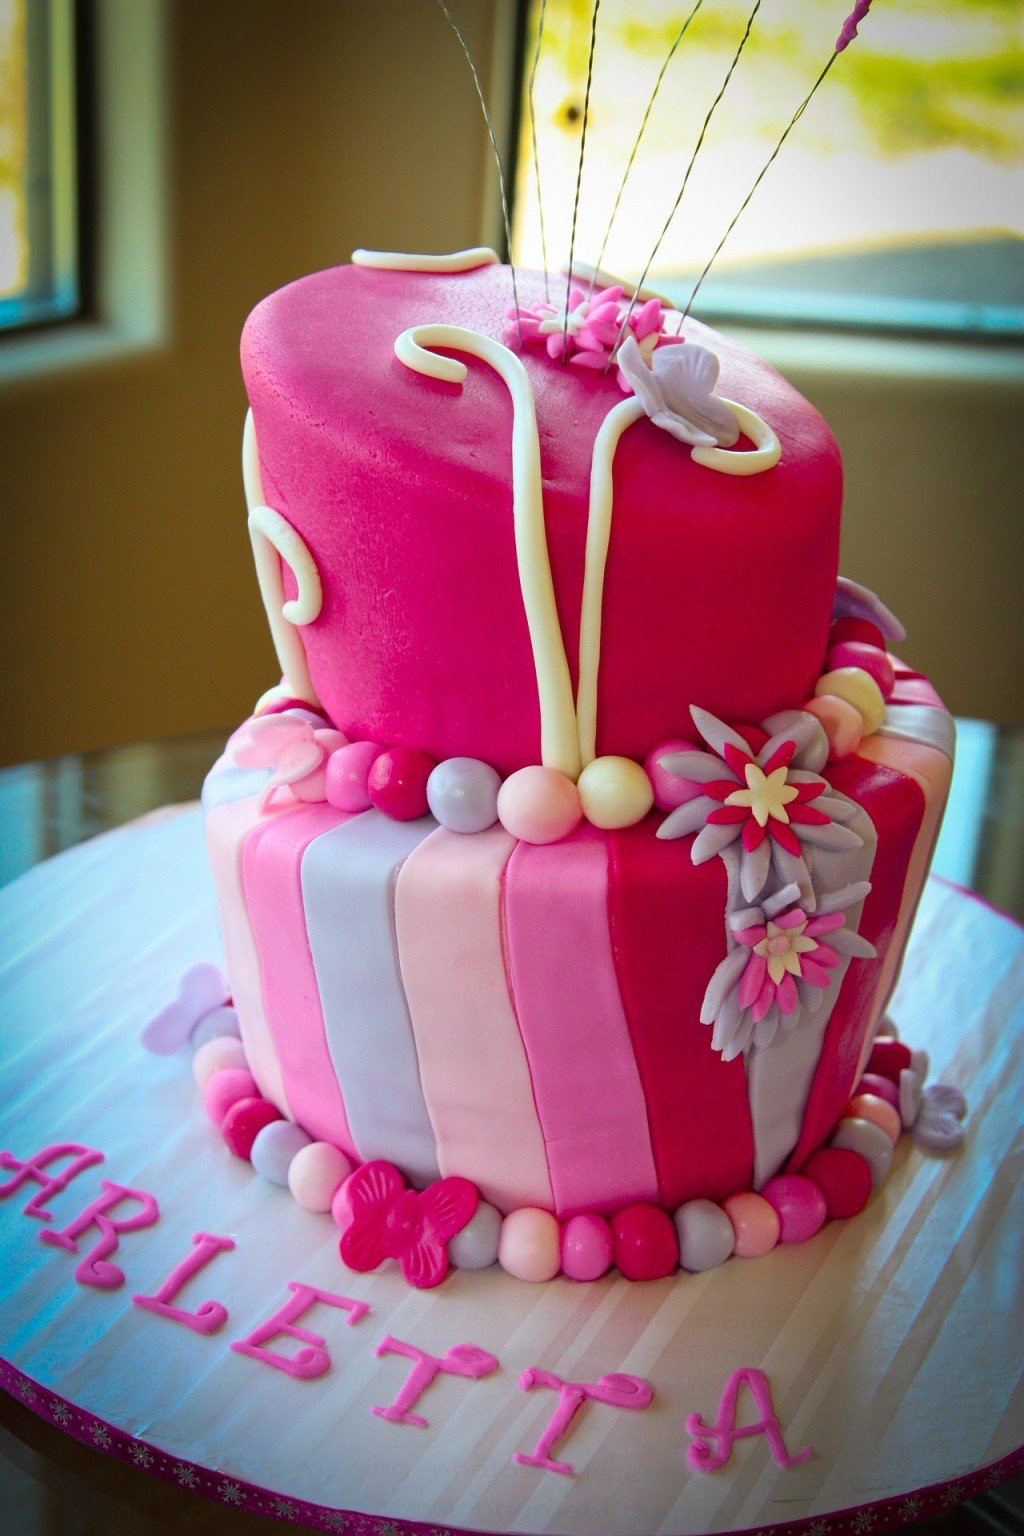 Gorgeous Birthday Cakes
 50 Beautiful Birthday Cake and Ideas for Kids and